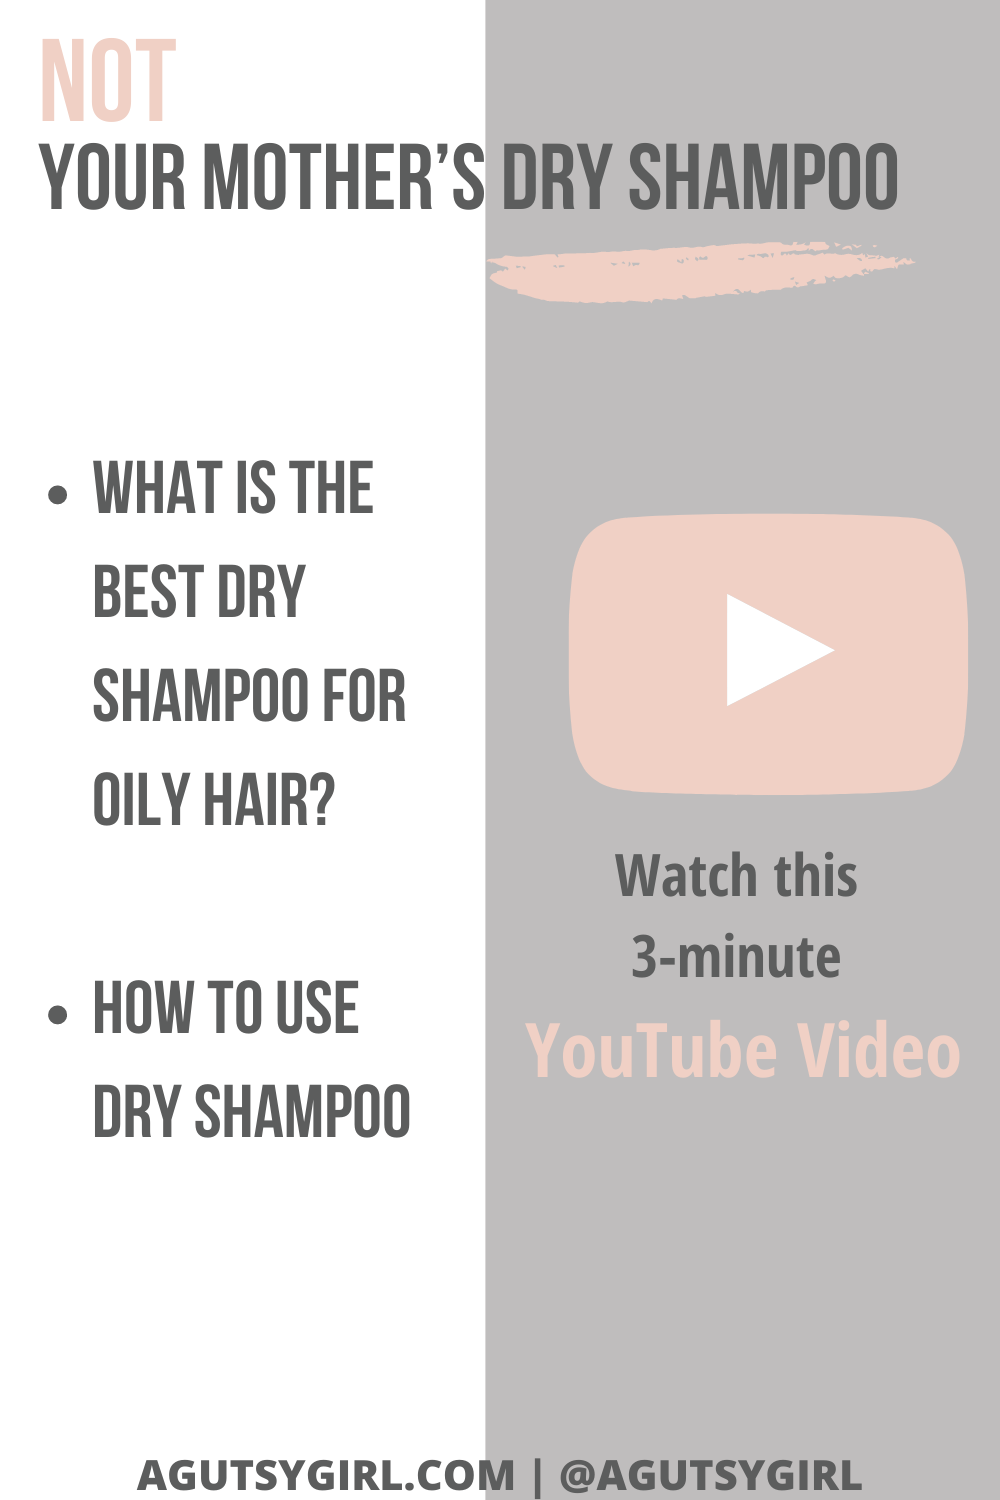 Not Your Mother's Dry Shampoo natural ingredients agutsygirl.com #dryshampoo #naturalshampoo #shampoo